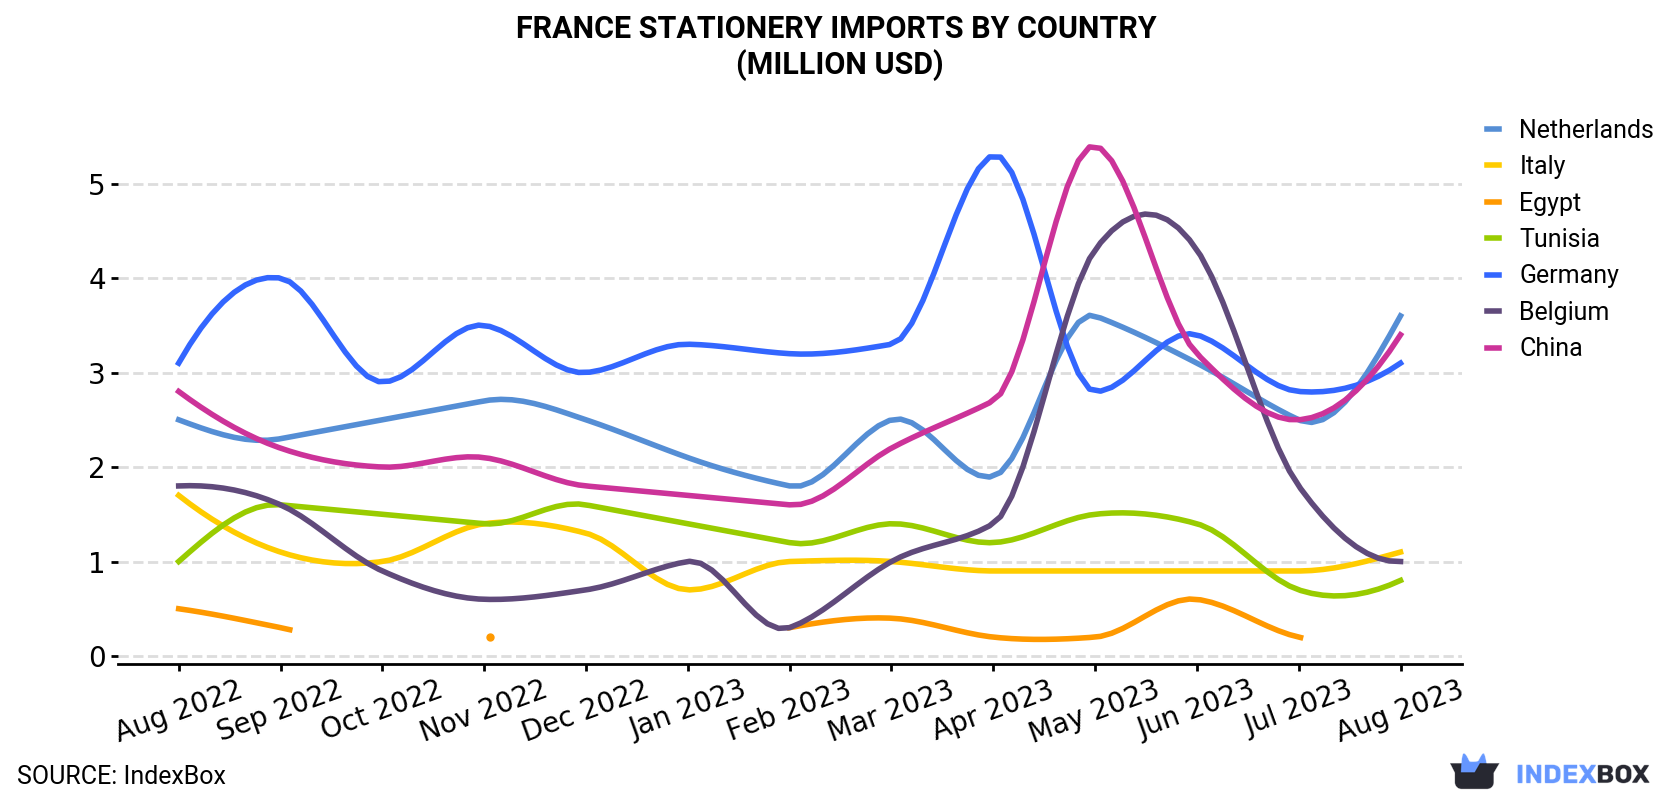 France Stationery Imports By Country (Million USD)